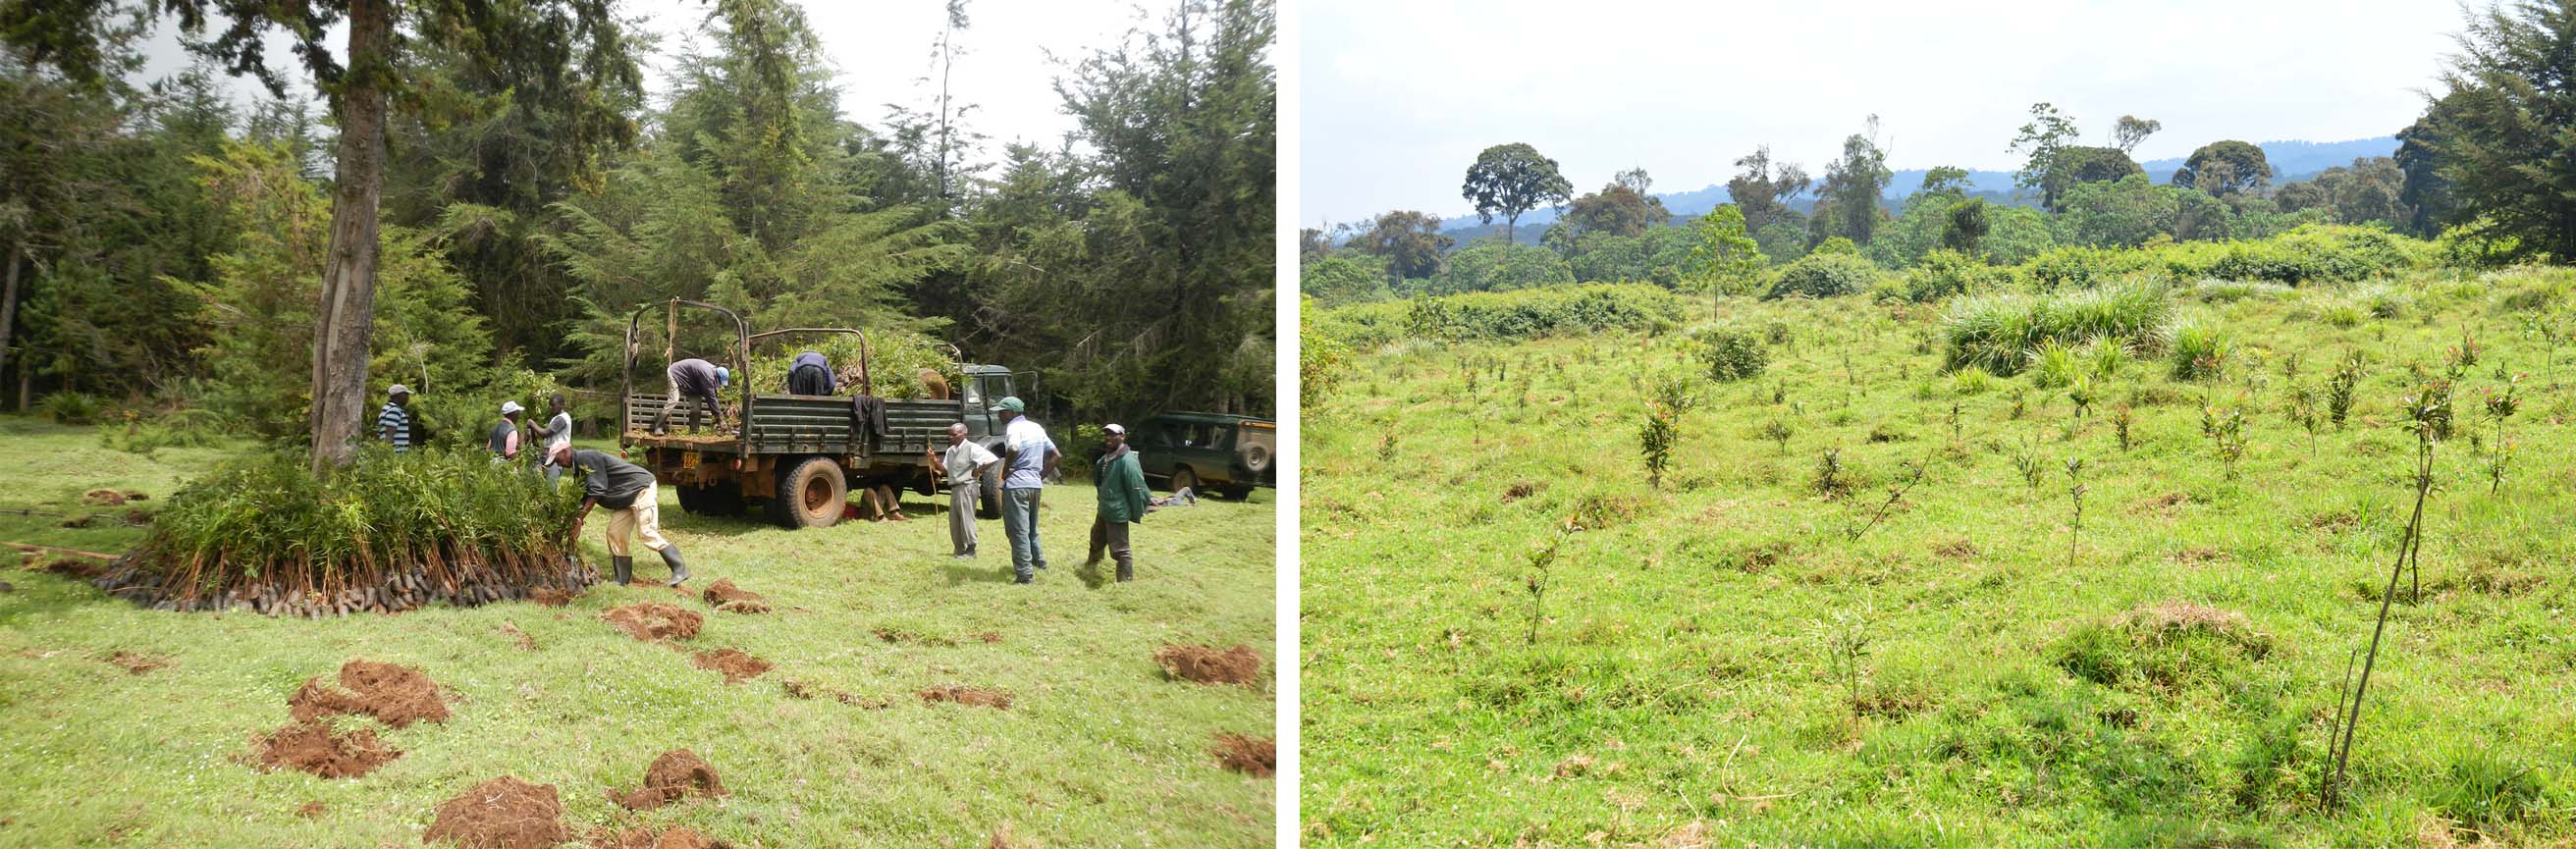 The tree seedlings are offloaded on site in April 2015 and Current status of the site showing a high survival rate of the trees